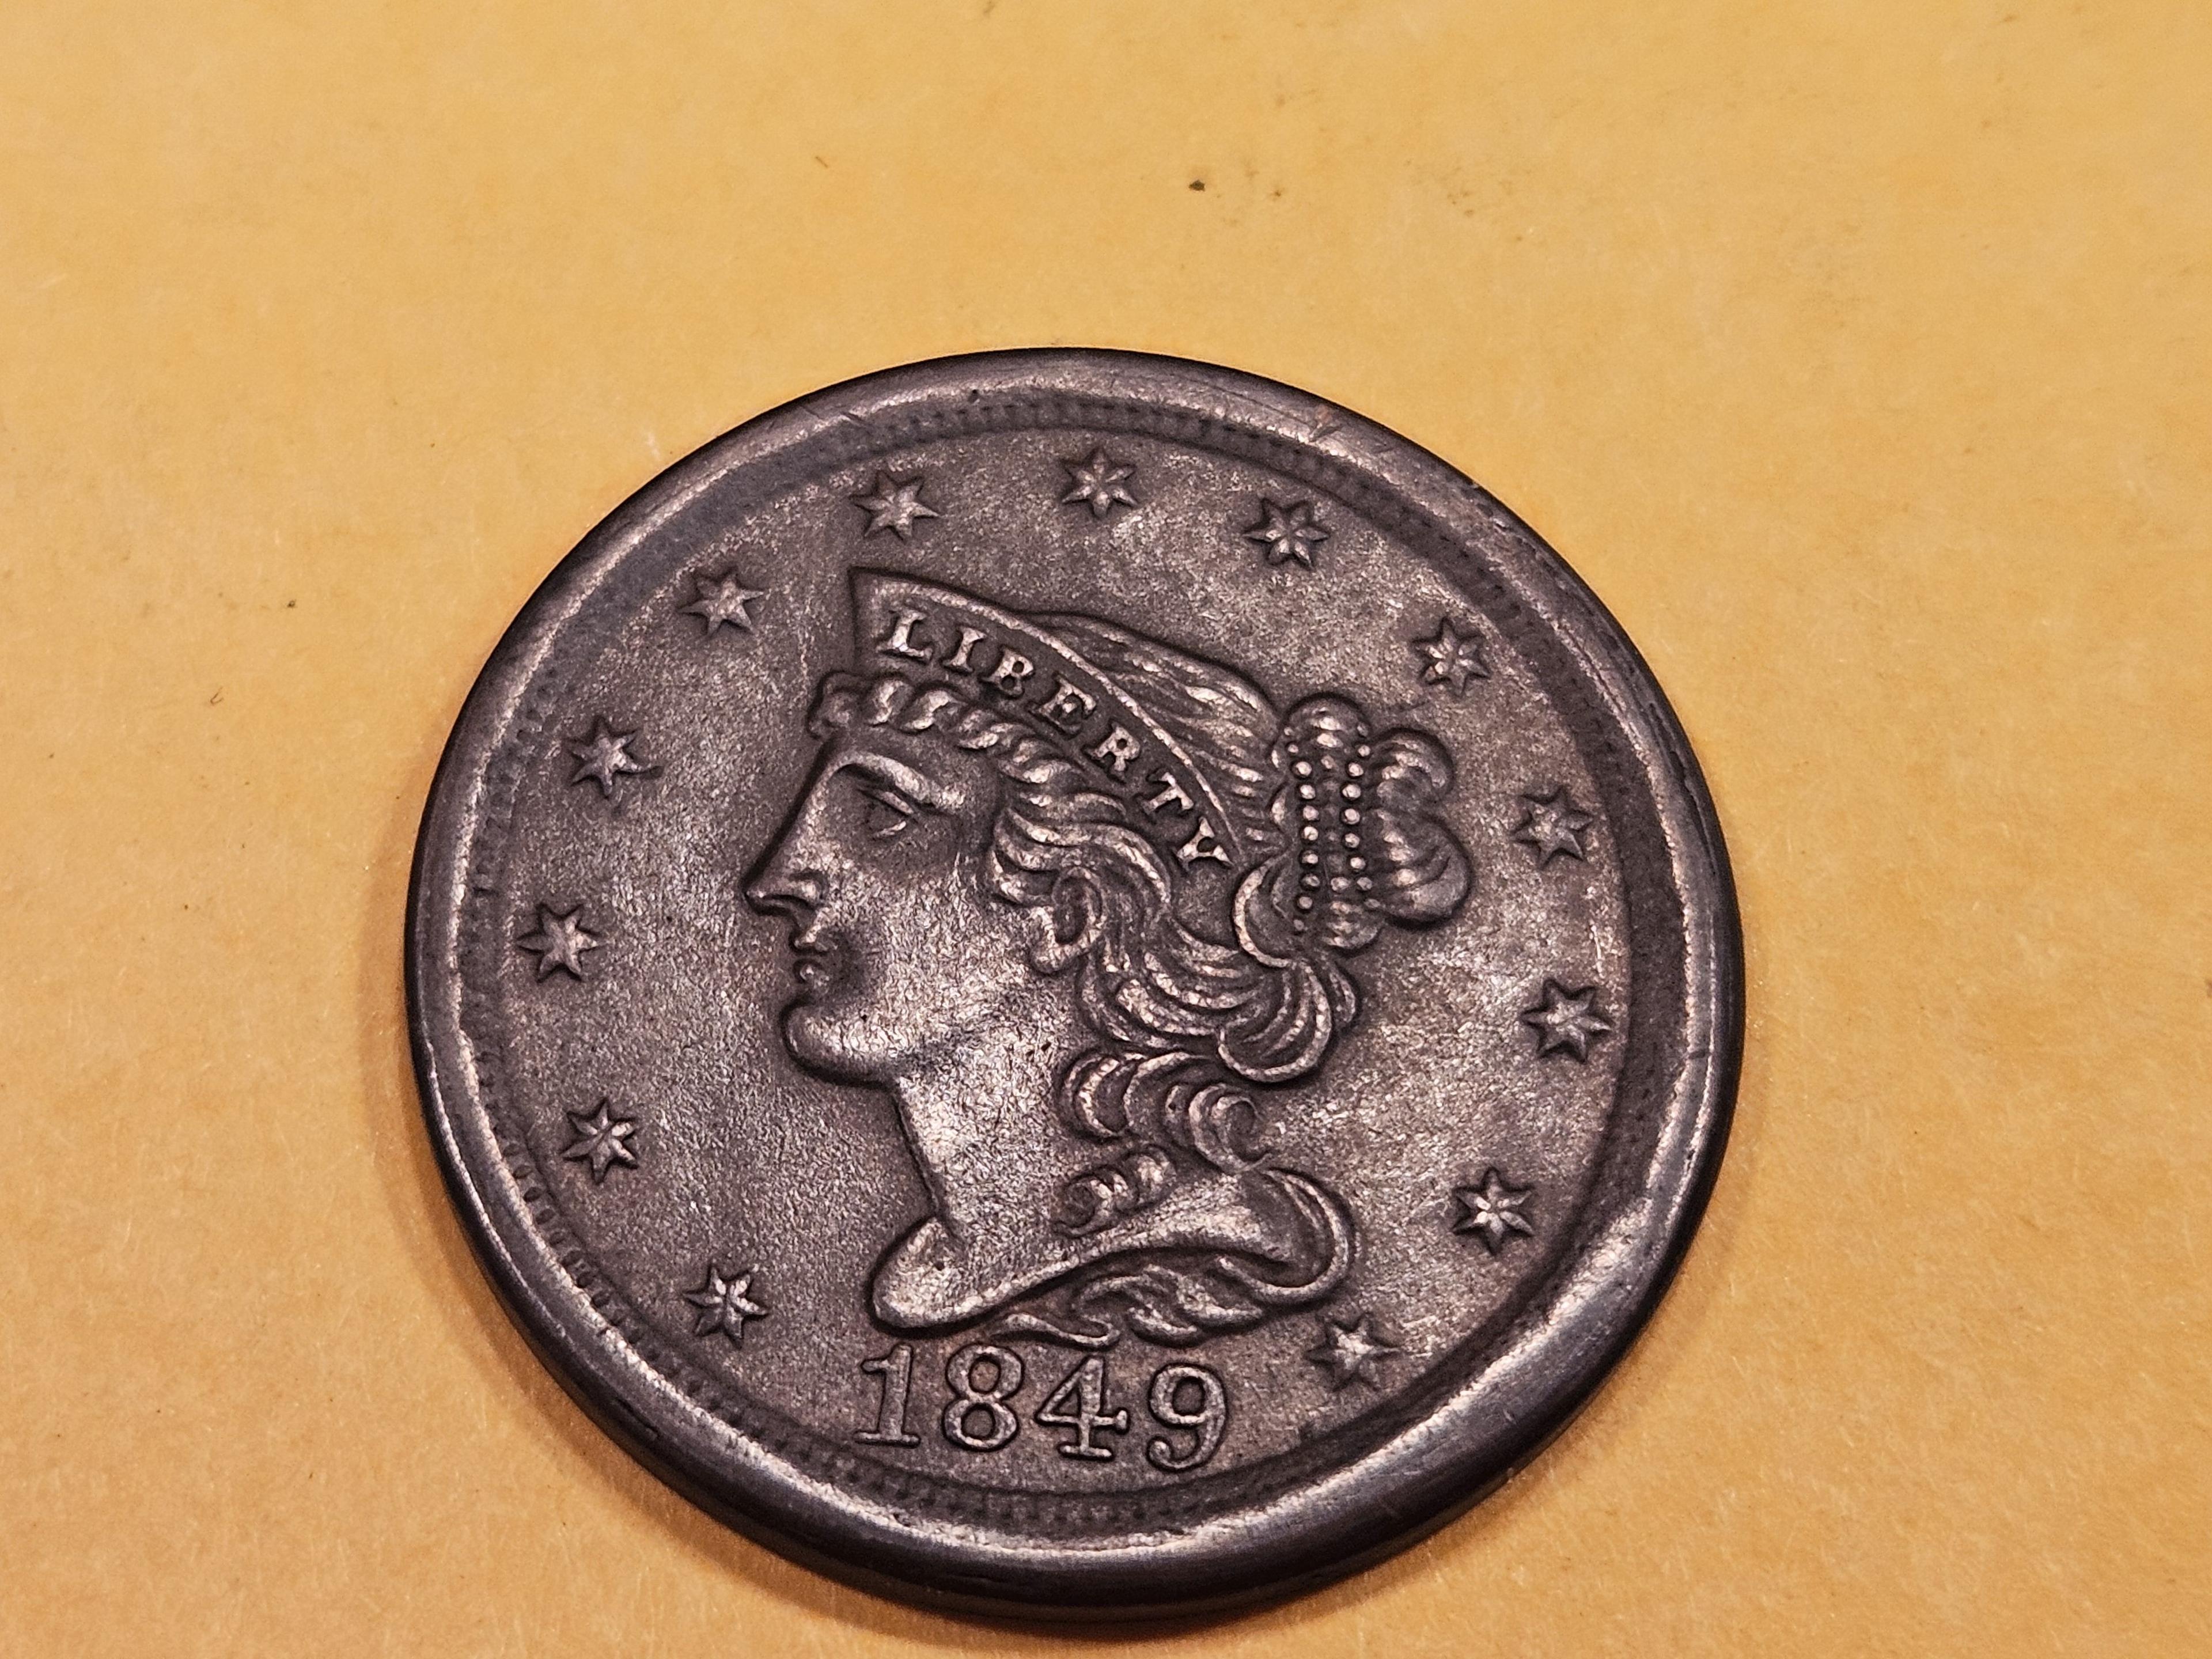 * 1849 Braided Hair Half-Cent in About Uncirculated